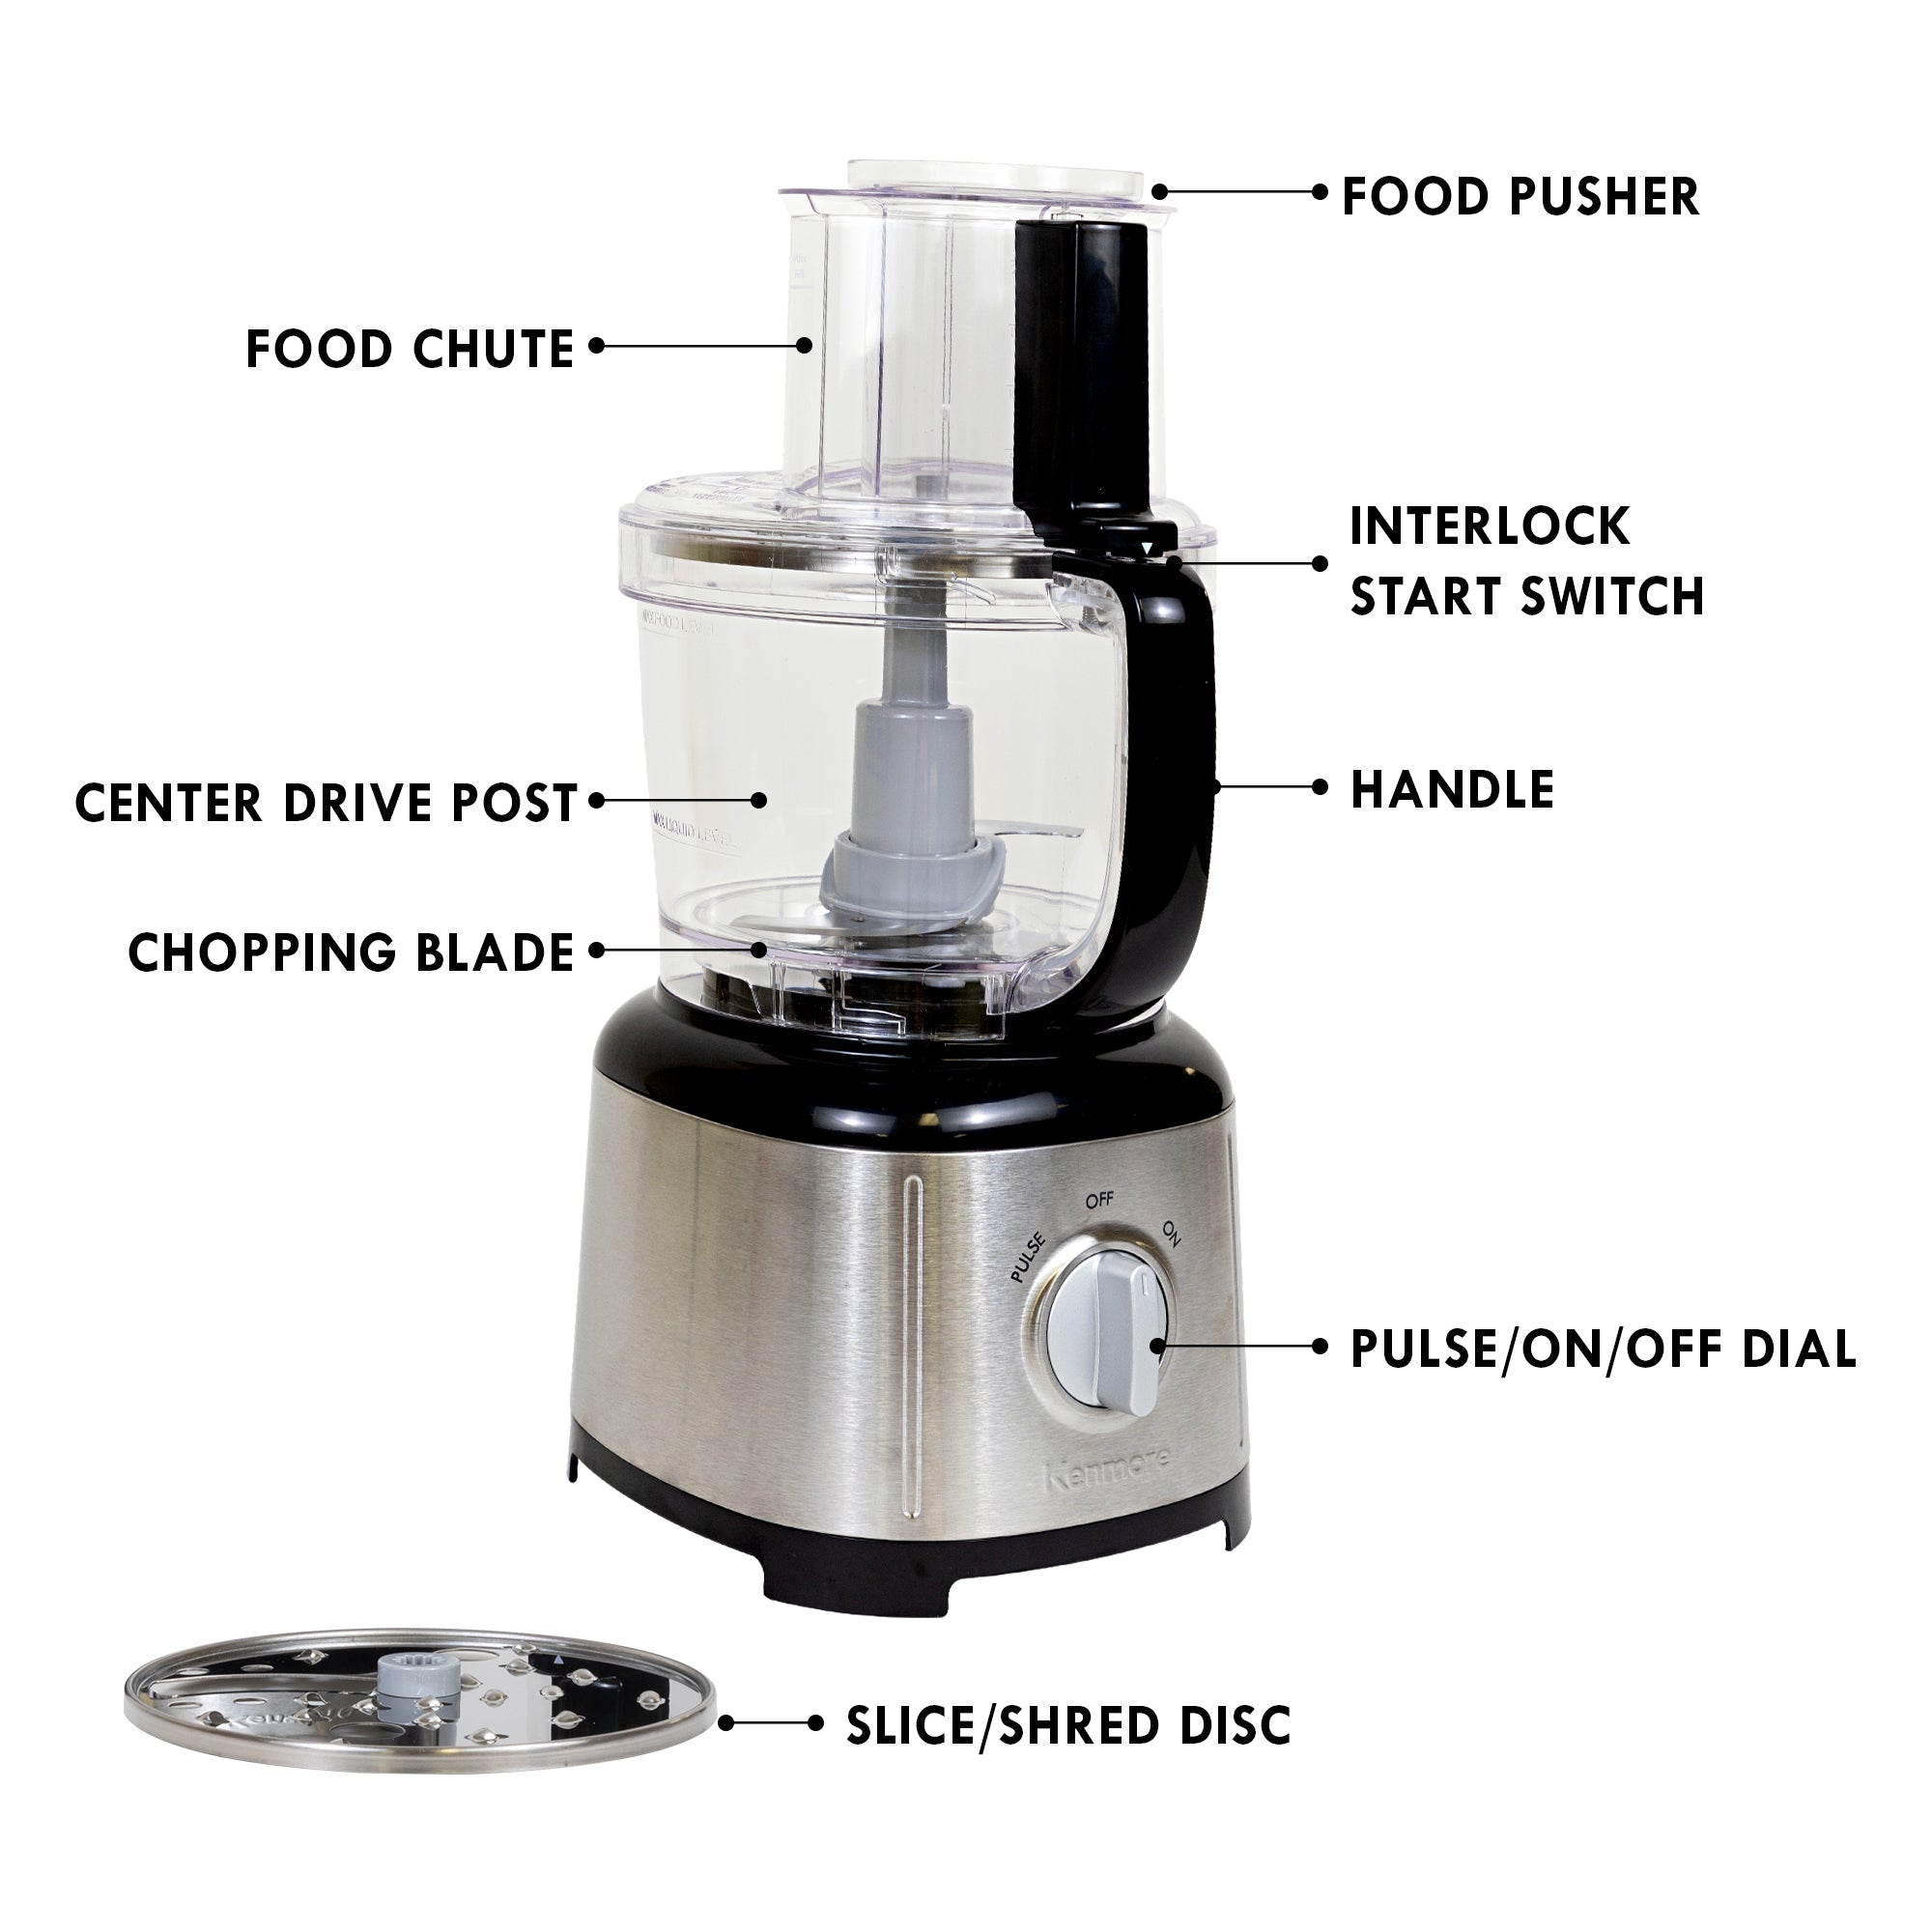 Product shot of Kenmore 11 cup food processor and vegetable chopper with parts and accessories labeled: Food pusher; food chute; interlock start switch; handle; center drive post; chopping blade; pulse/on/off dial; slice/shred disc